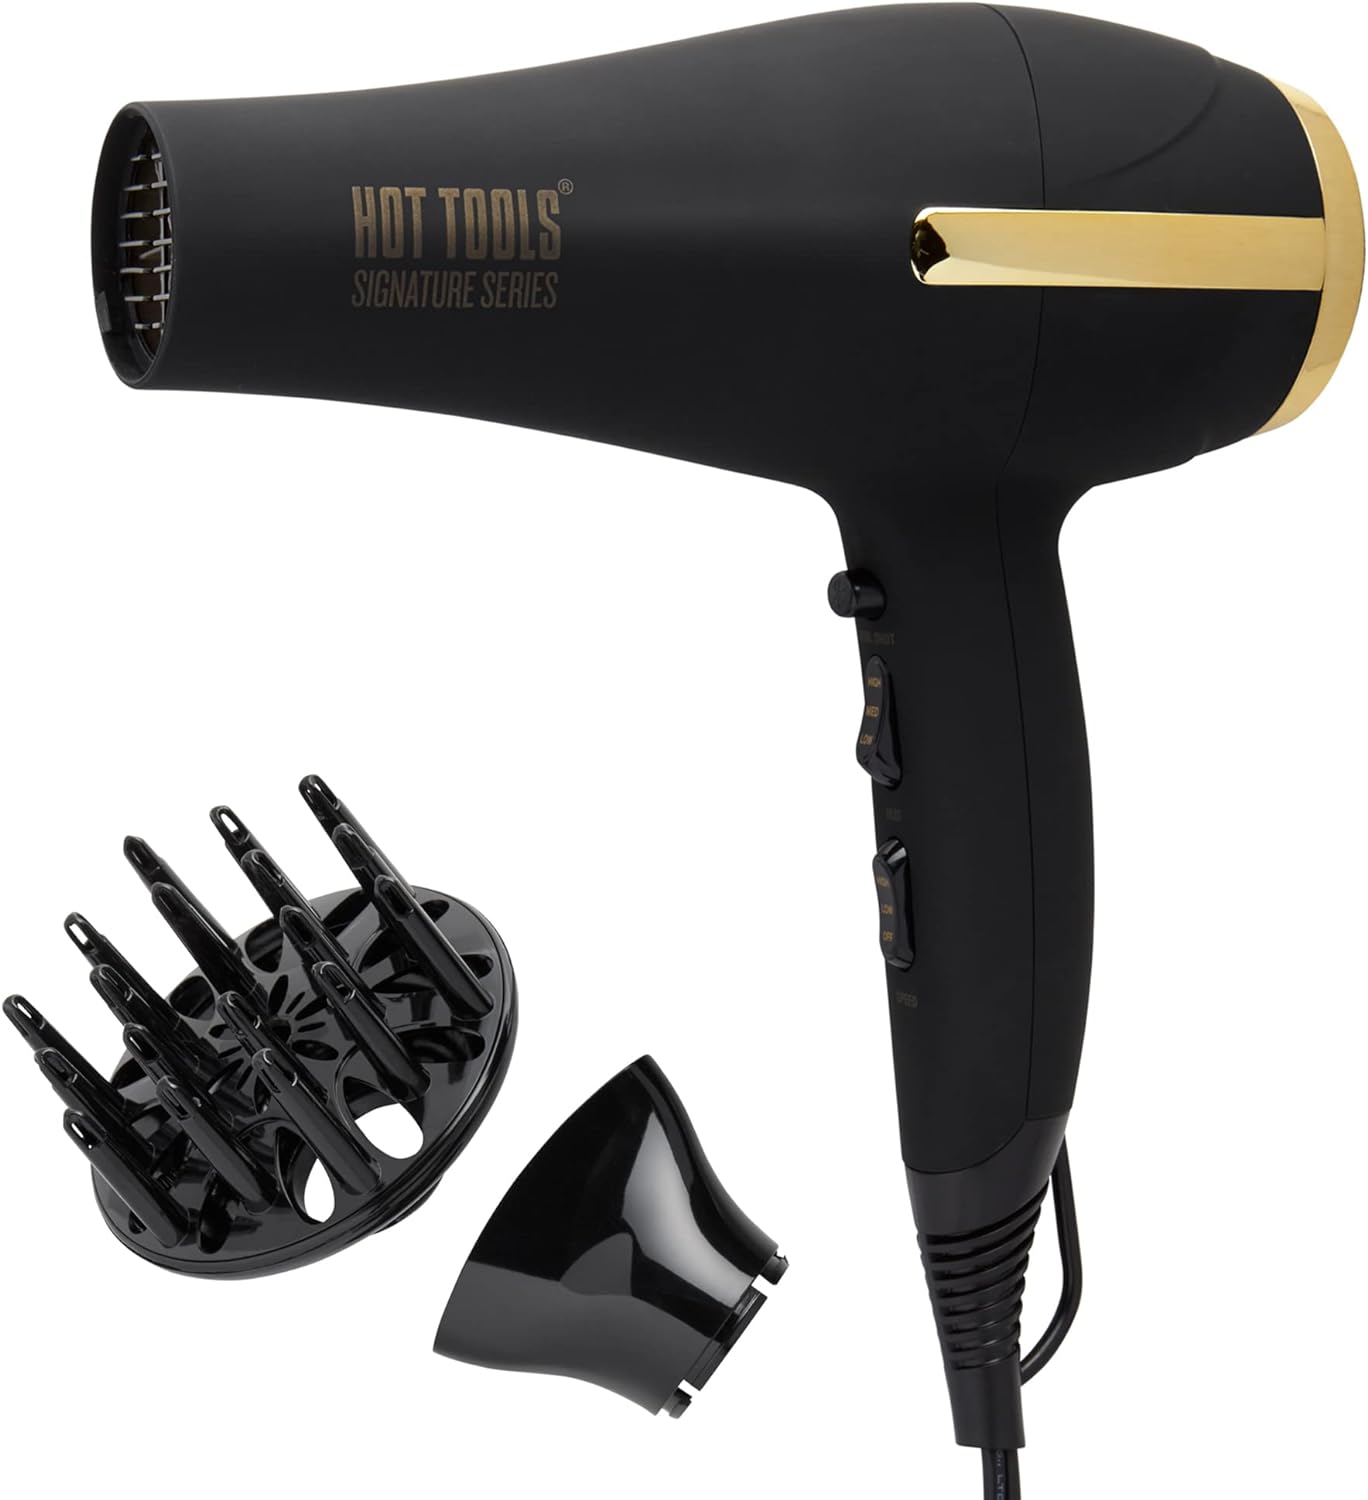 Hot Tools Pro Signature Ionic Ceramic Hair Dryer | Lightweight with Professional Blowout Results